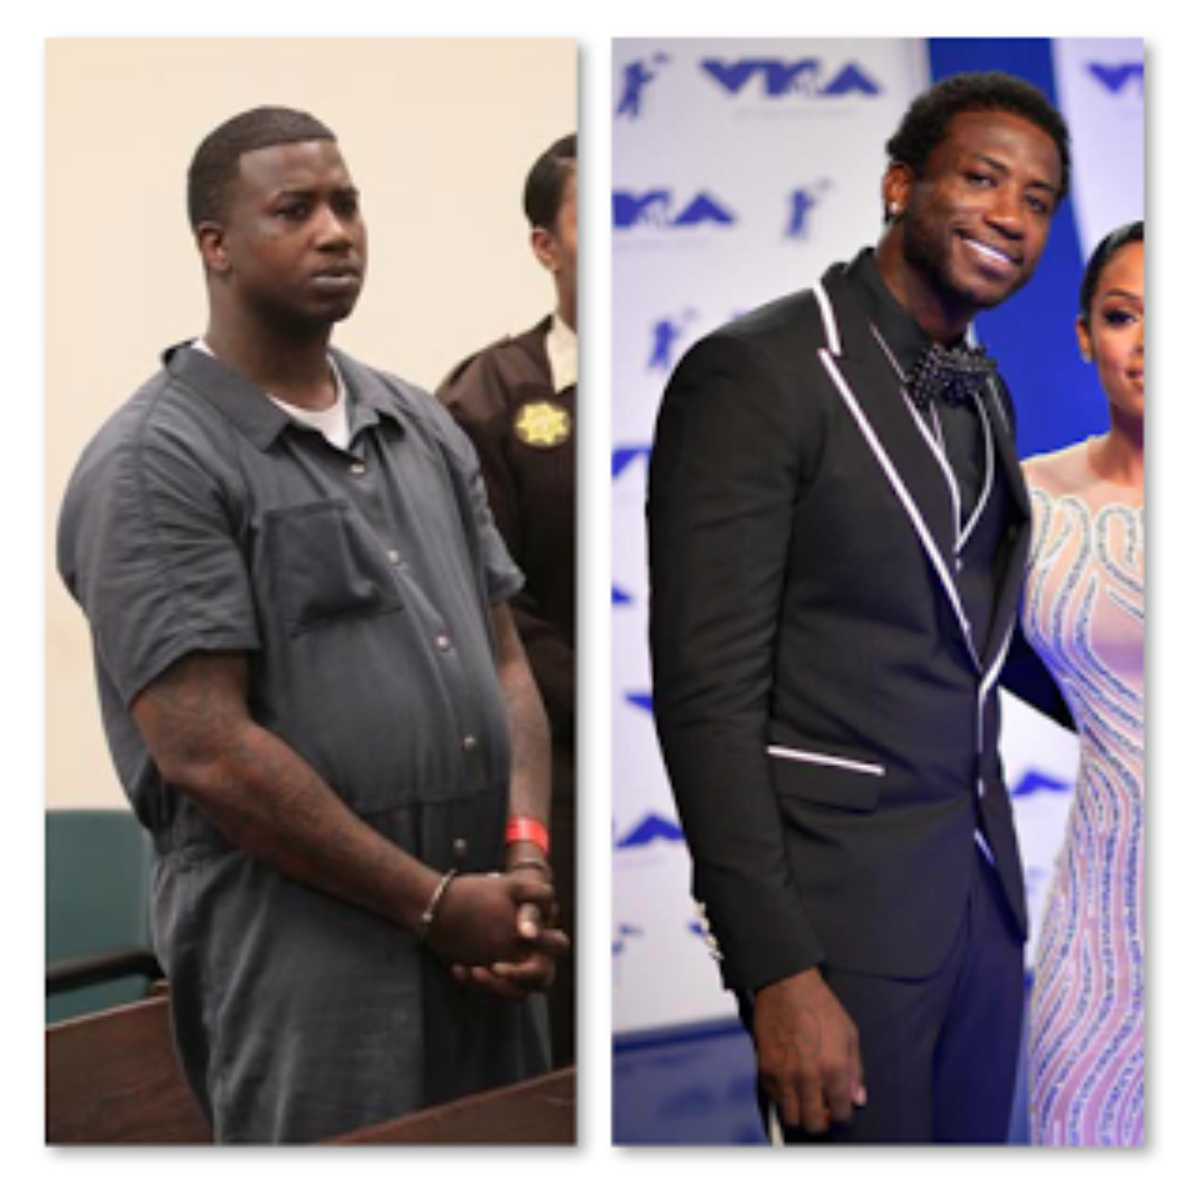 Gucci Mane Before And After Jail - Pictures - BBK